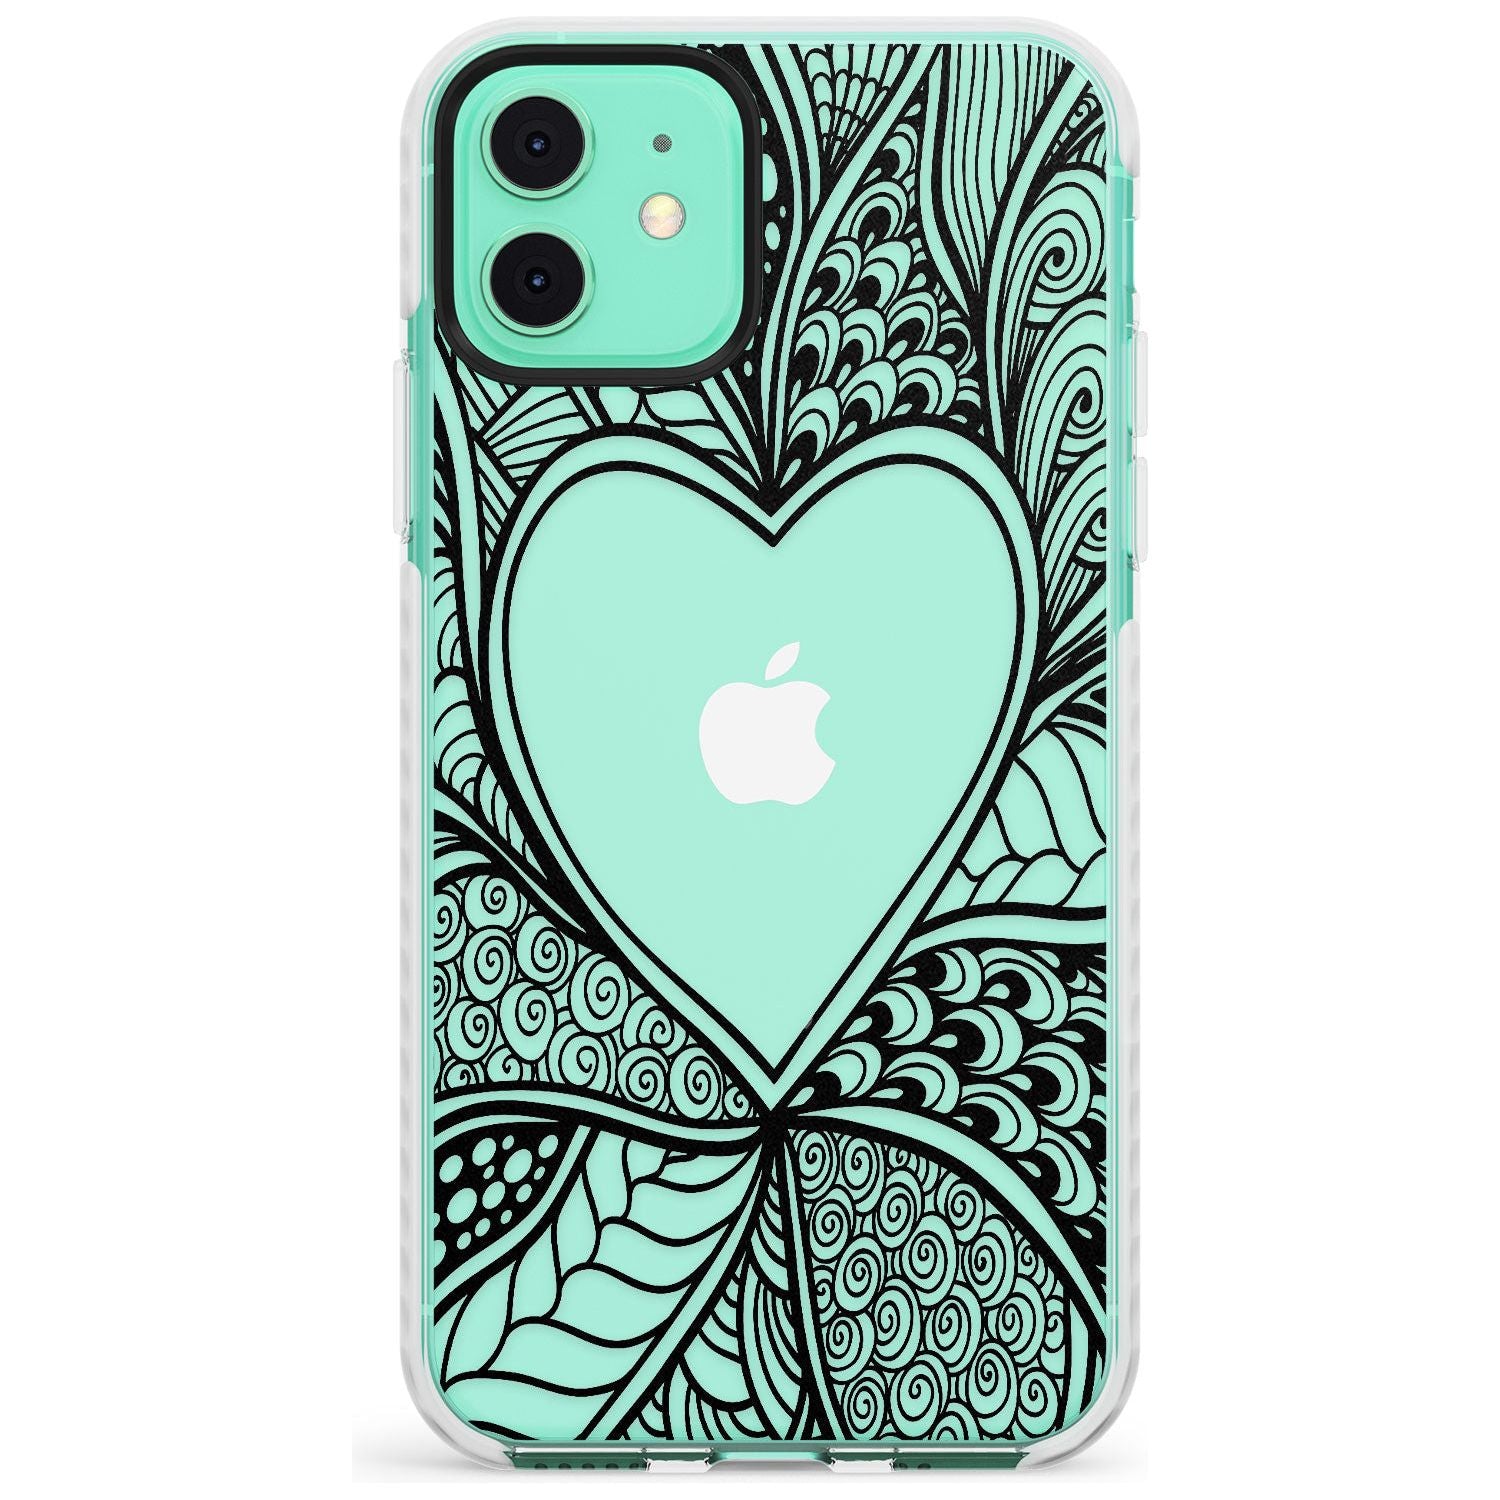 Black Henna Heart Impact Phone Case for iPhone 11